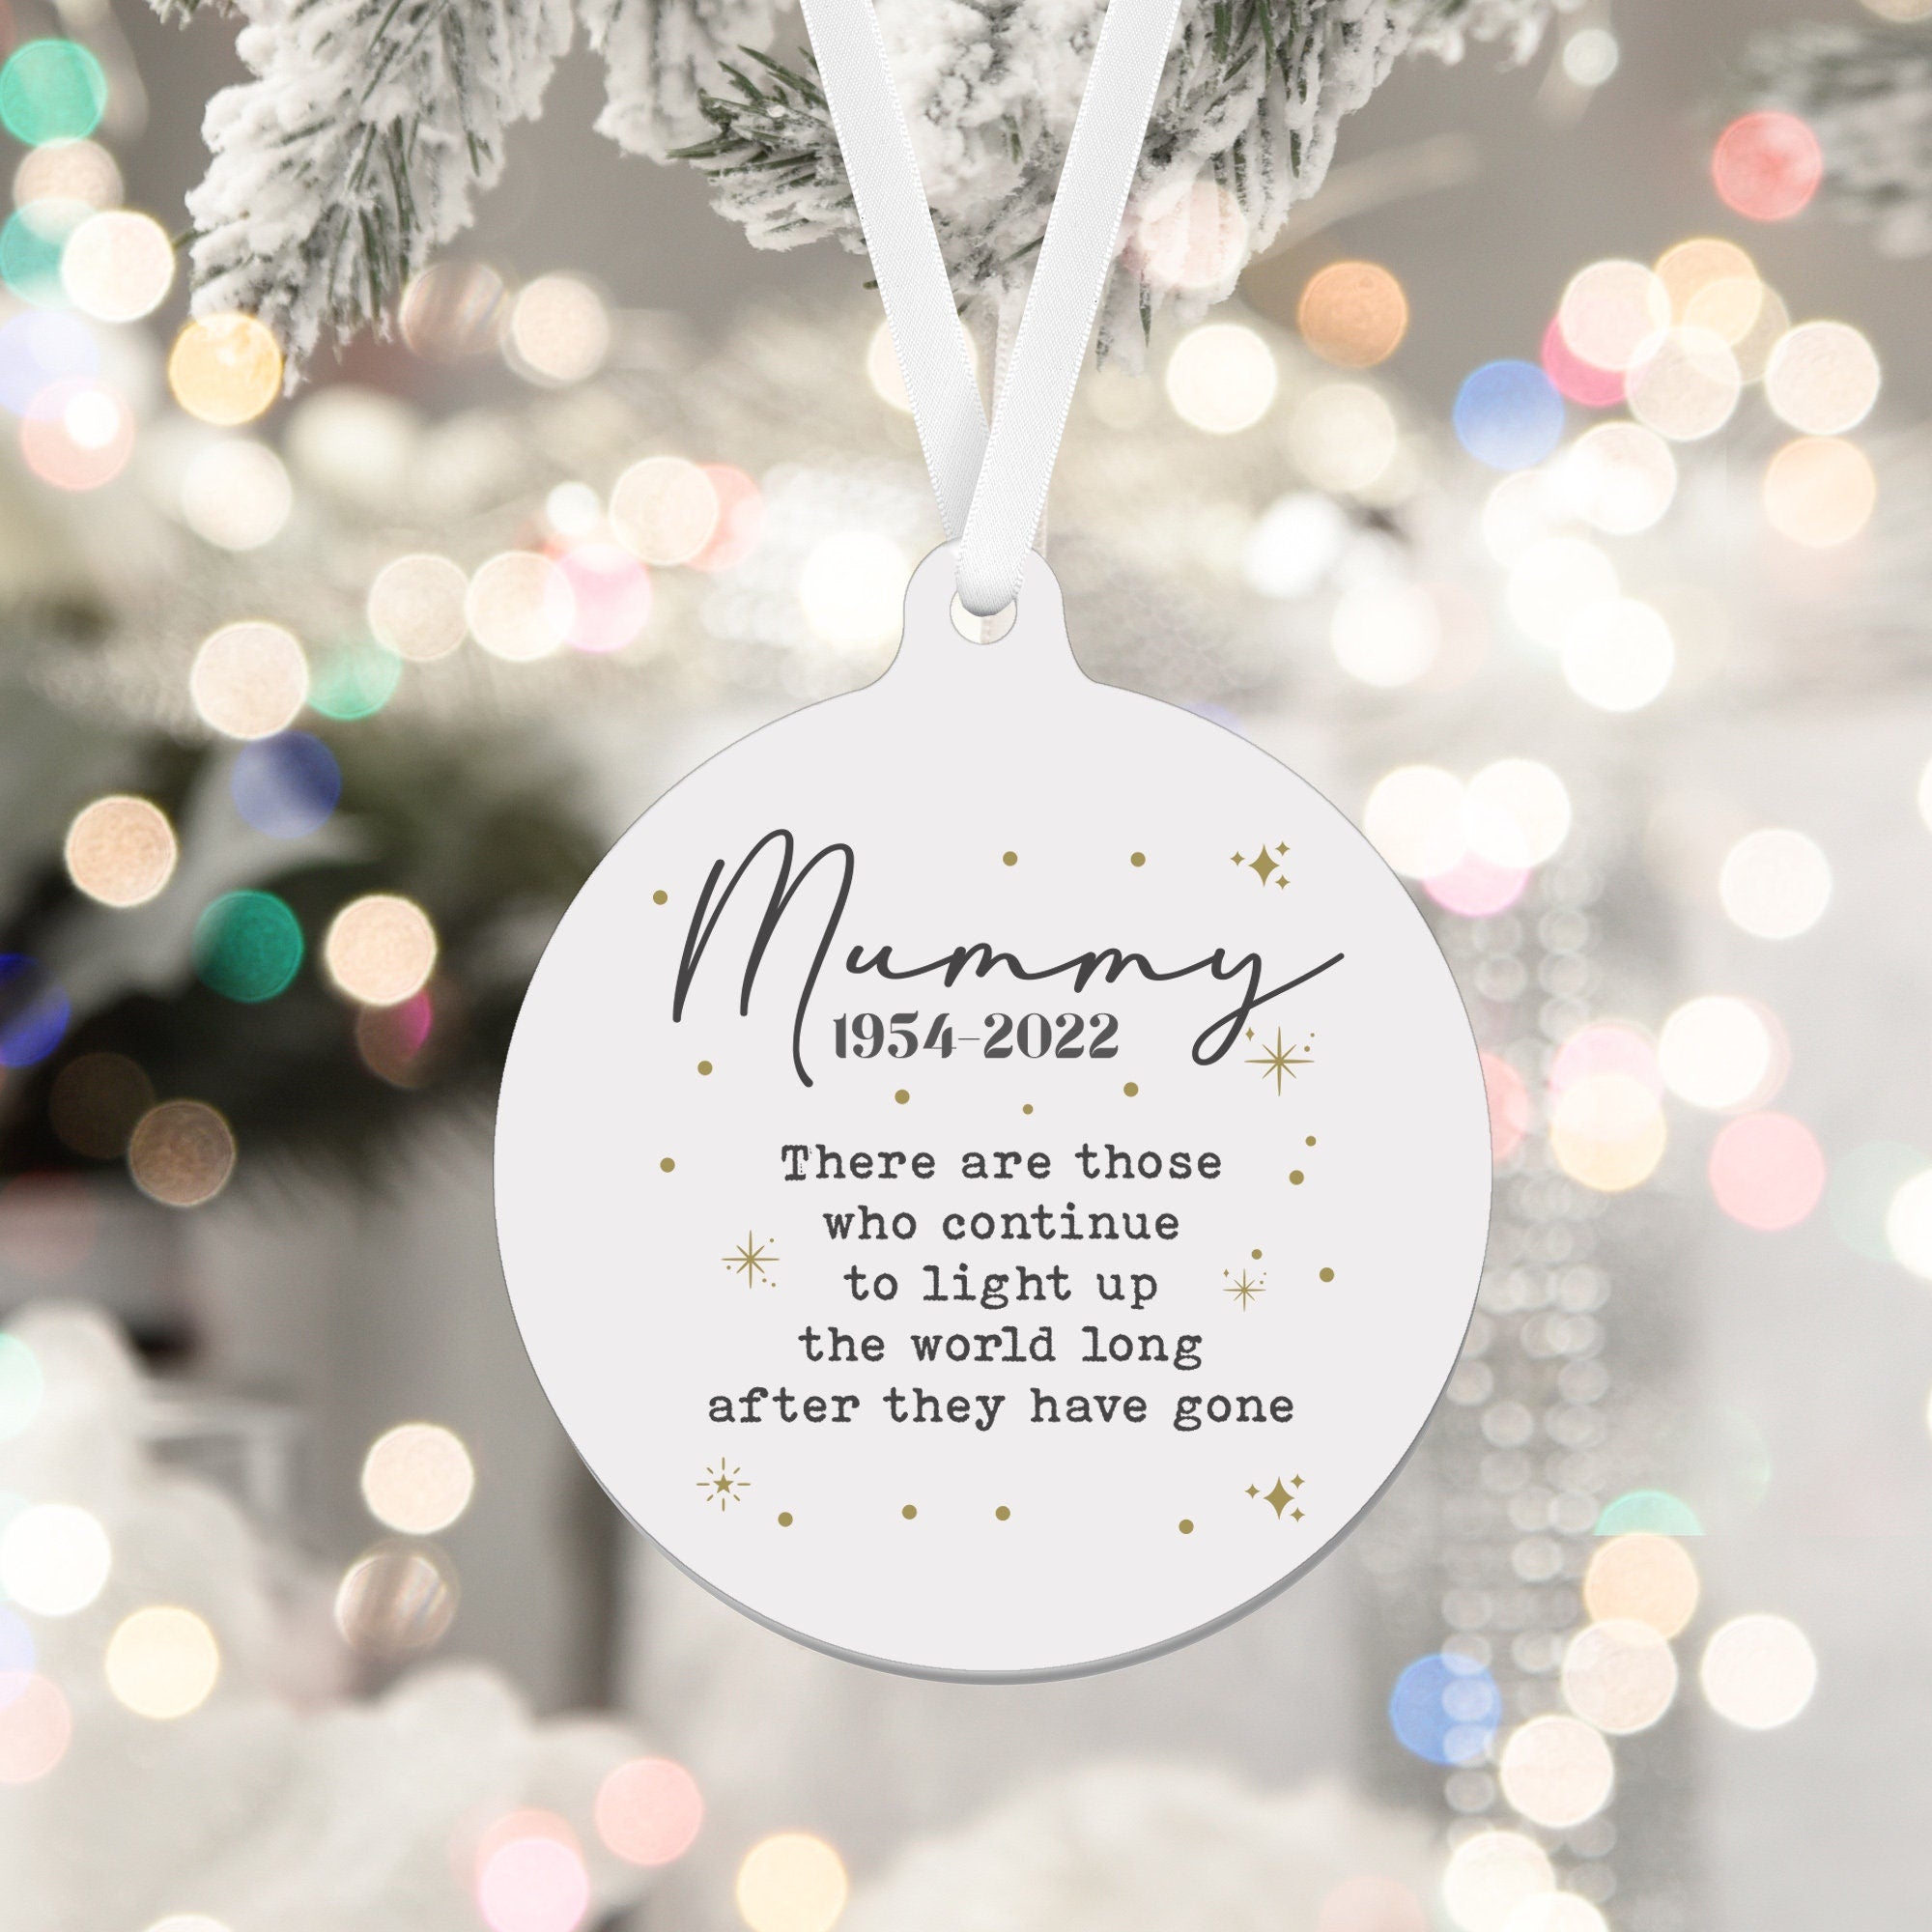 Personalised memorial metal ornament with name and date, Remembrance Christmas Tree Decoration